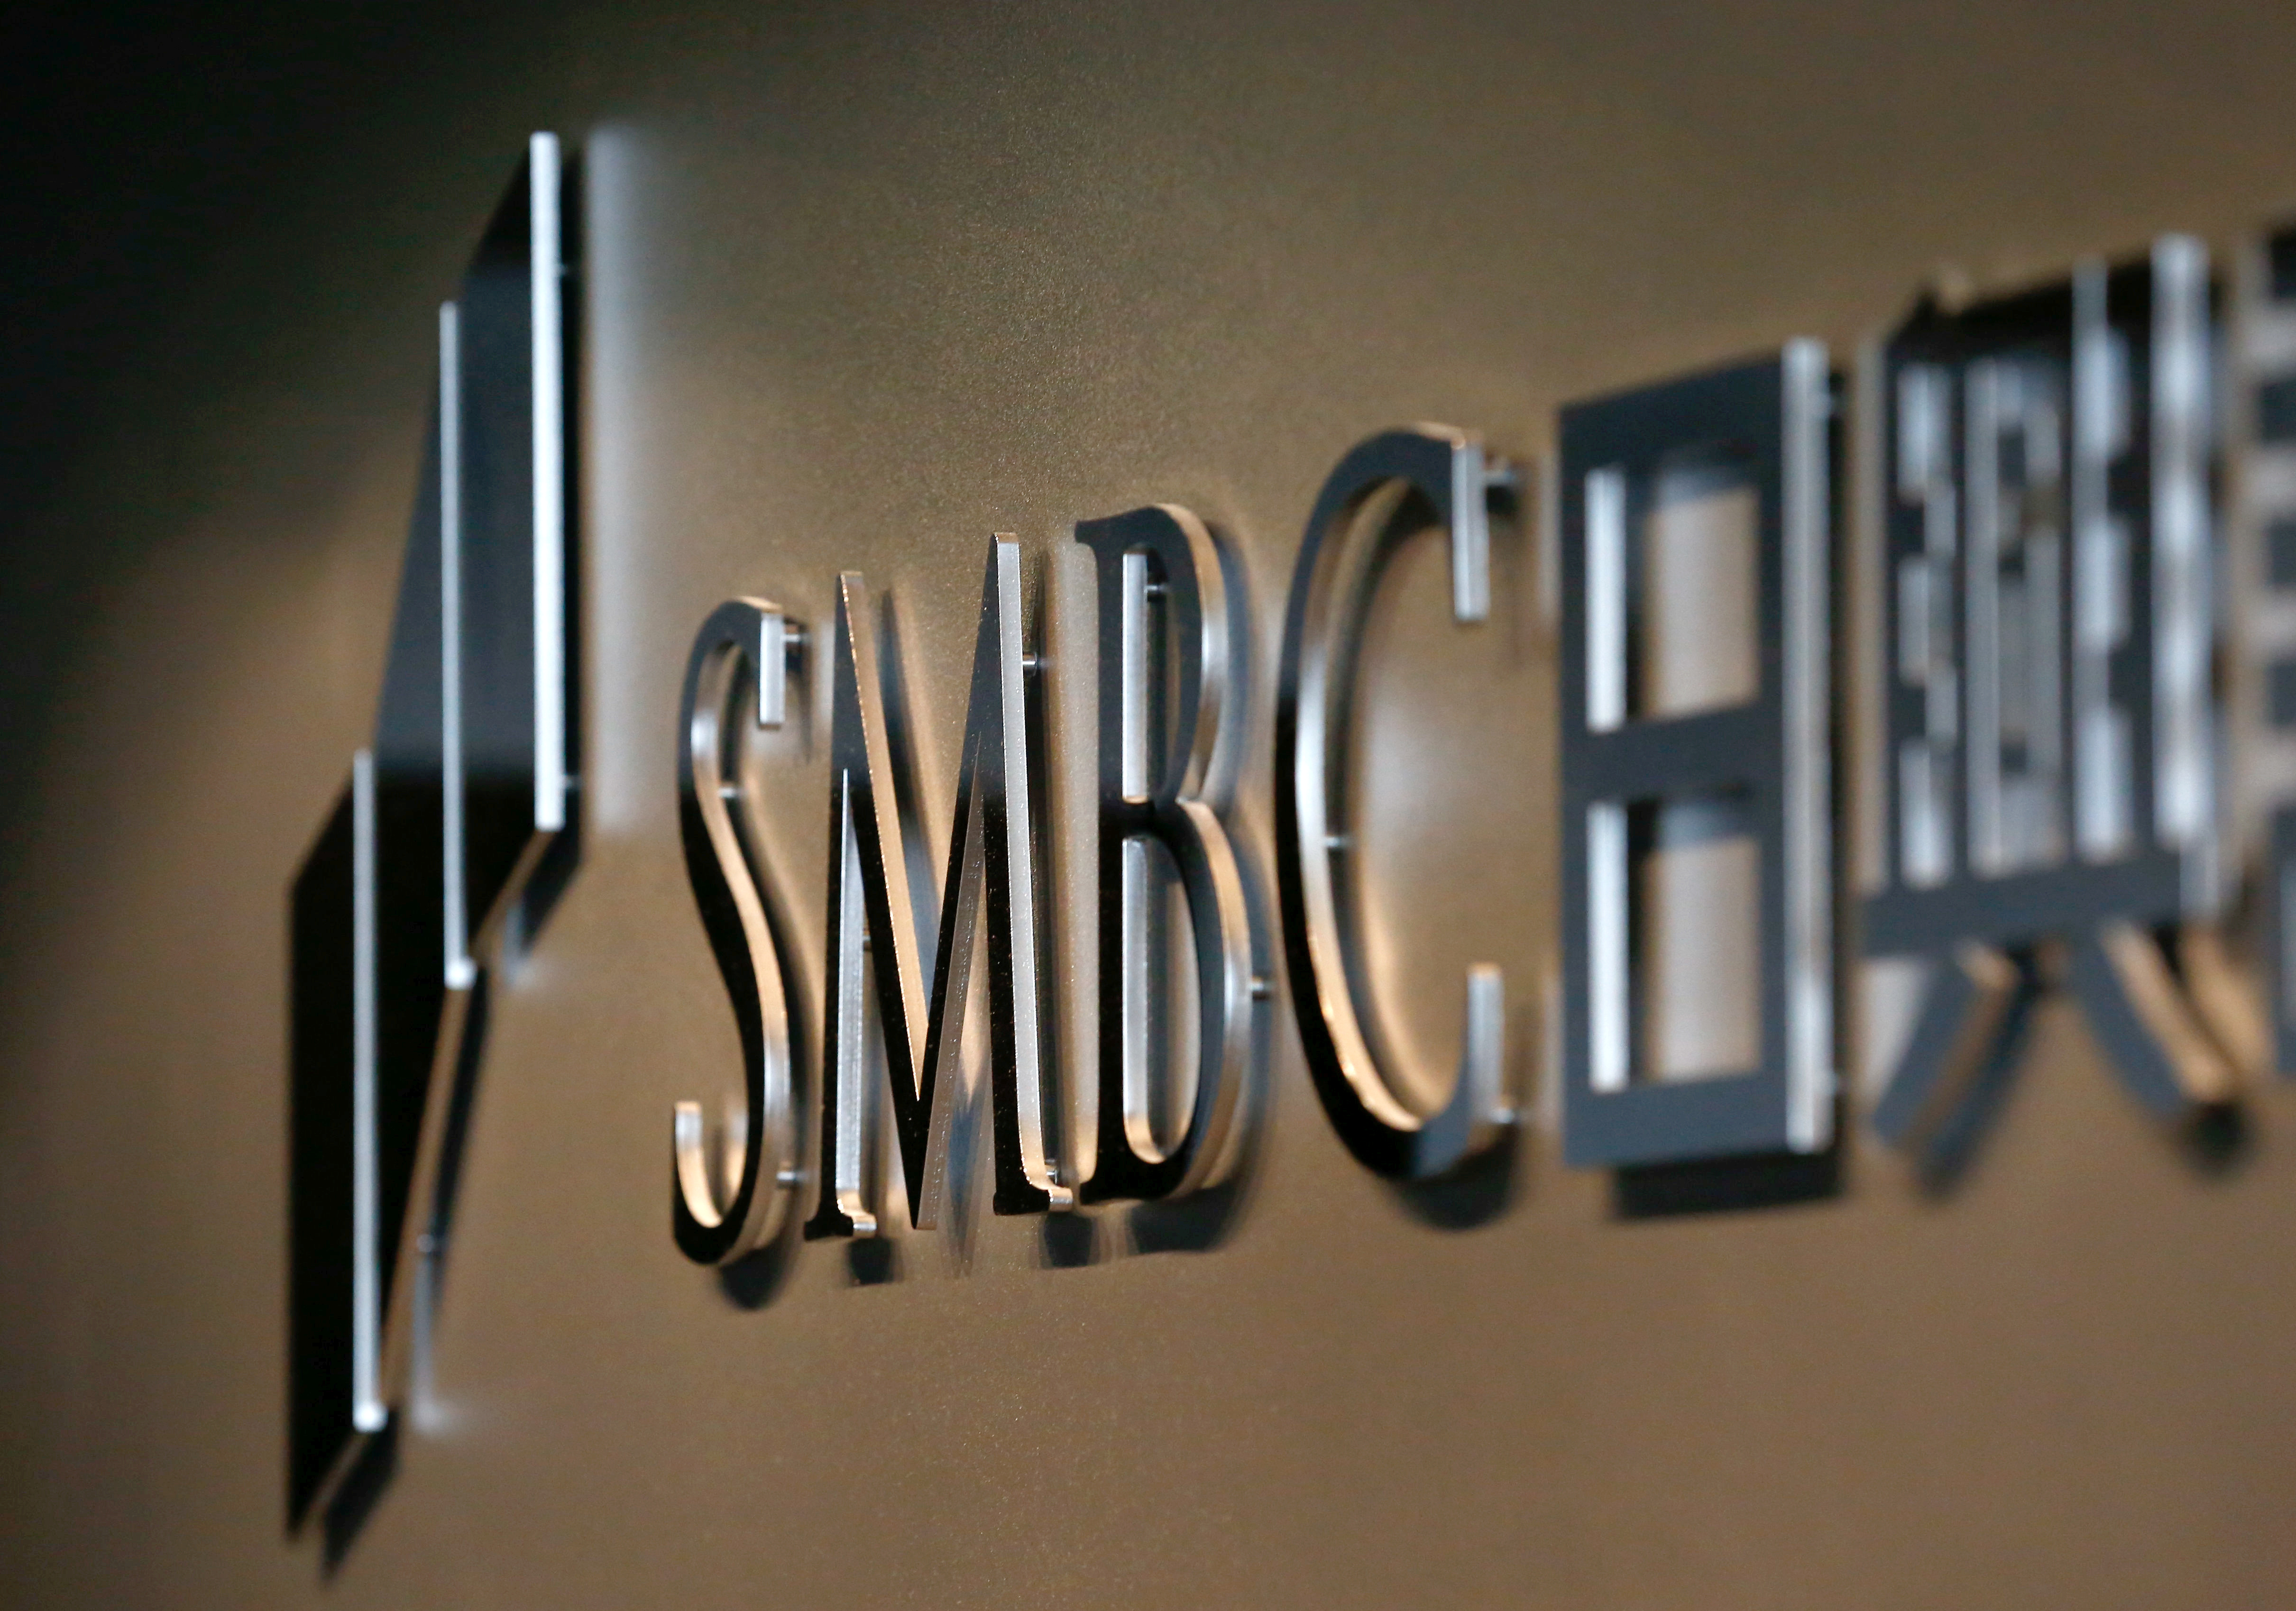 SMBC Nikko Securities' logo is pictured at its headquarters in Tokyo